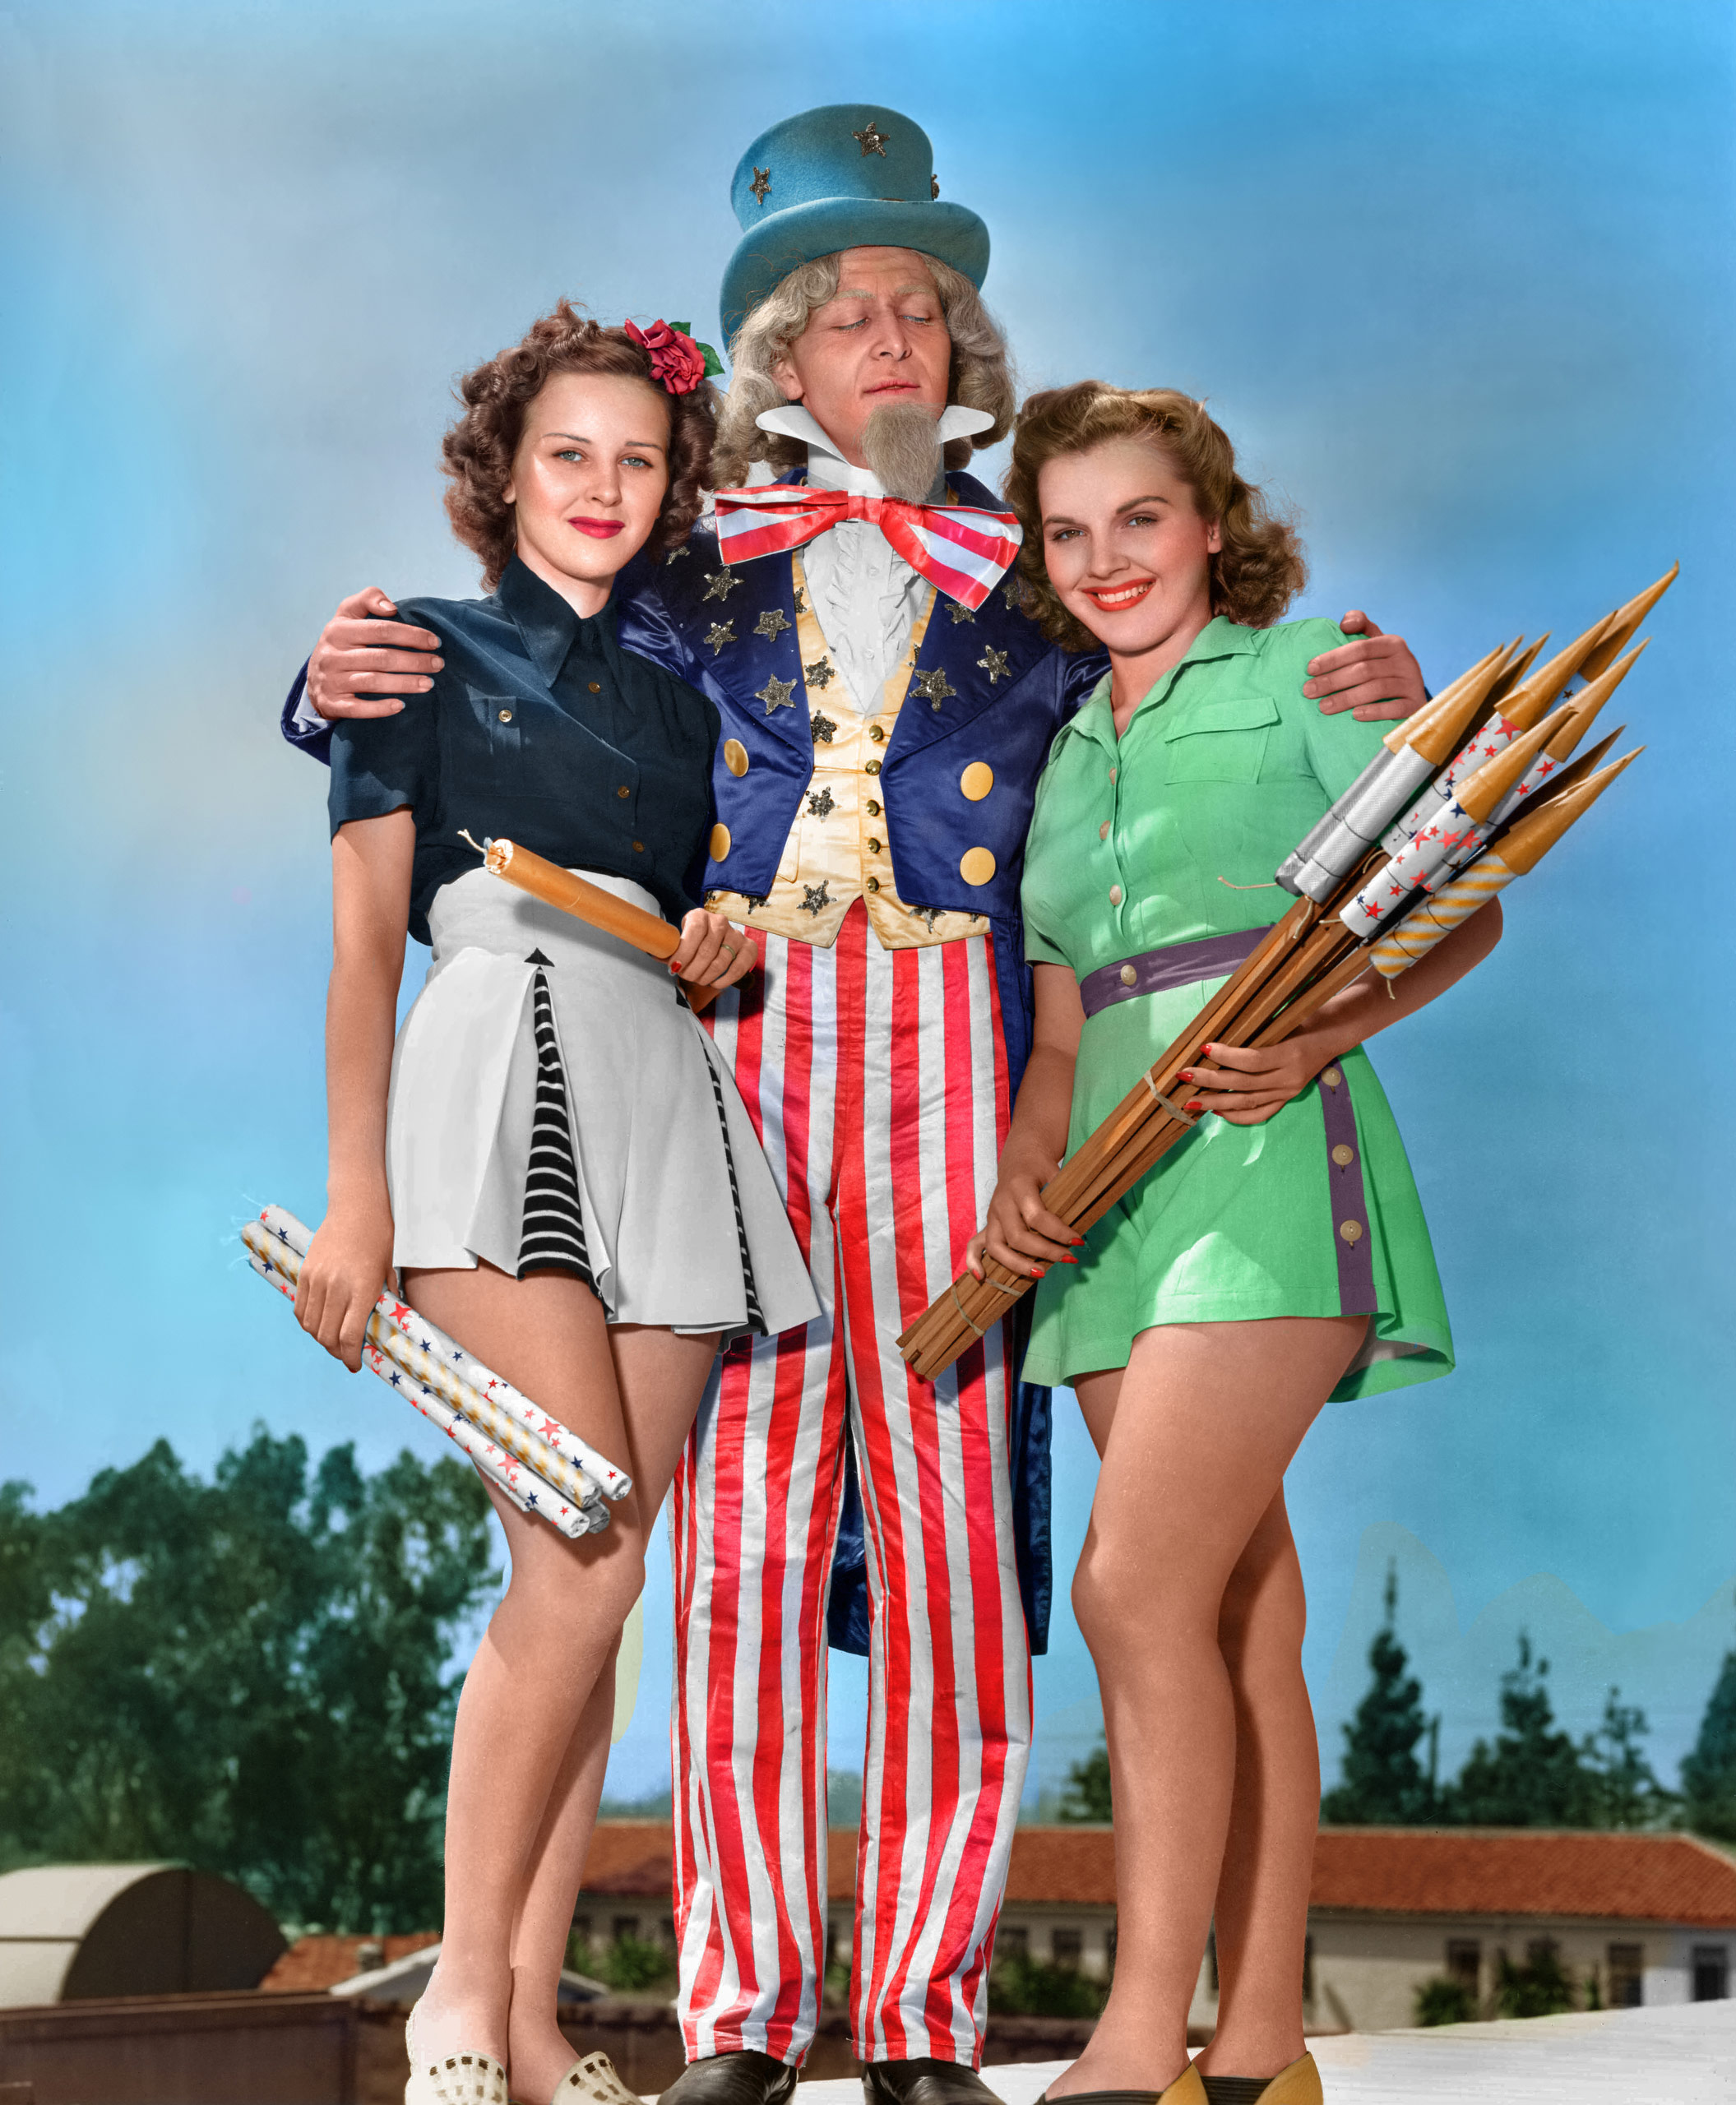 Costumed actors promote 4th of July celebrations as they pose with fireworks, Chicago, Illinois, circa 1940.